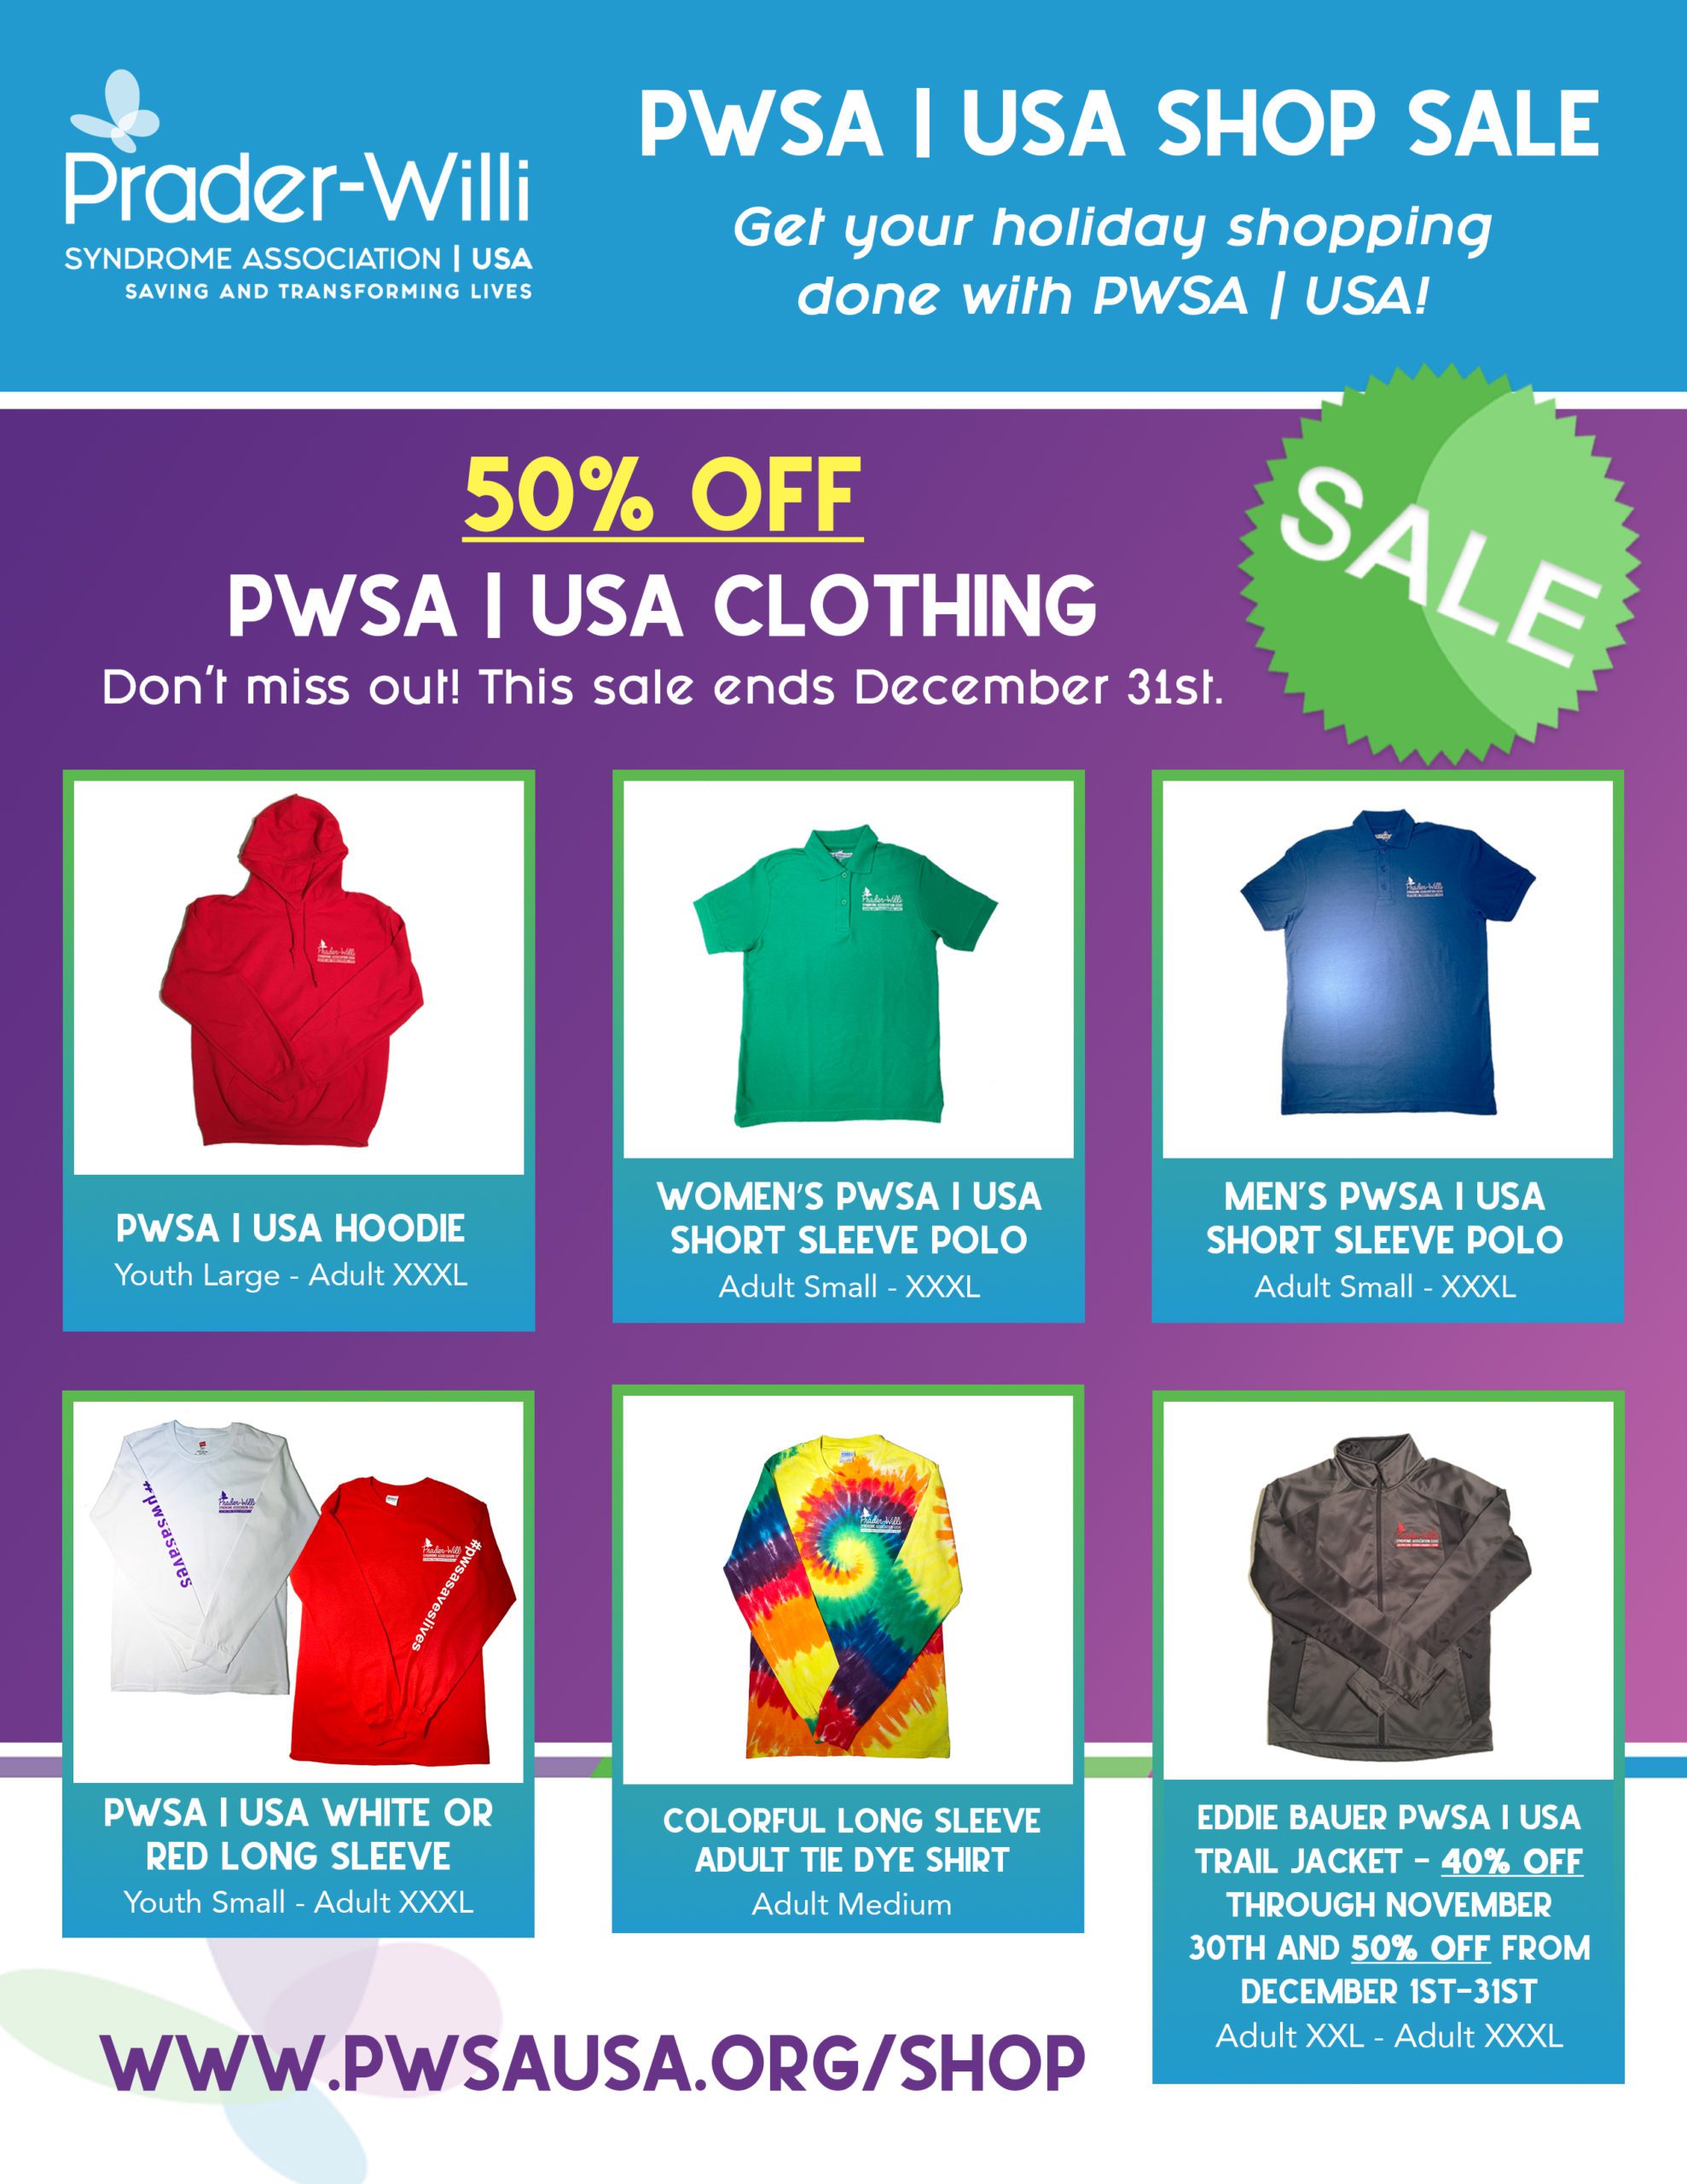 PWSA Store Discount Flyer 1 Scaled, Prader-Willi Syndrome Association | USA